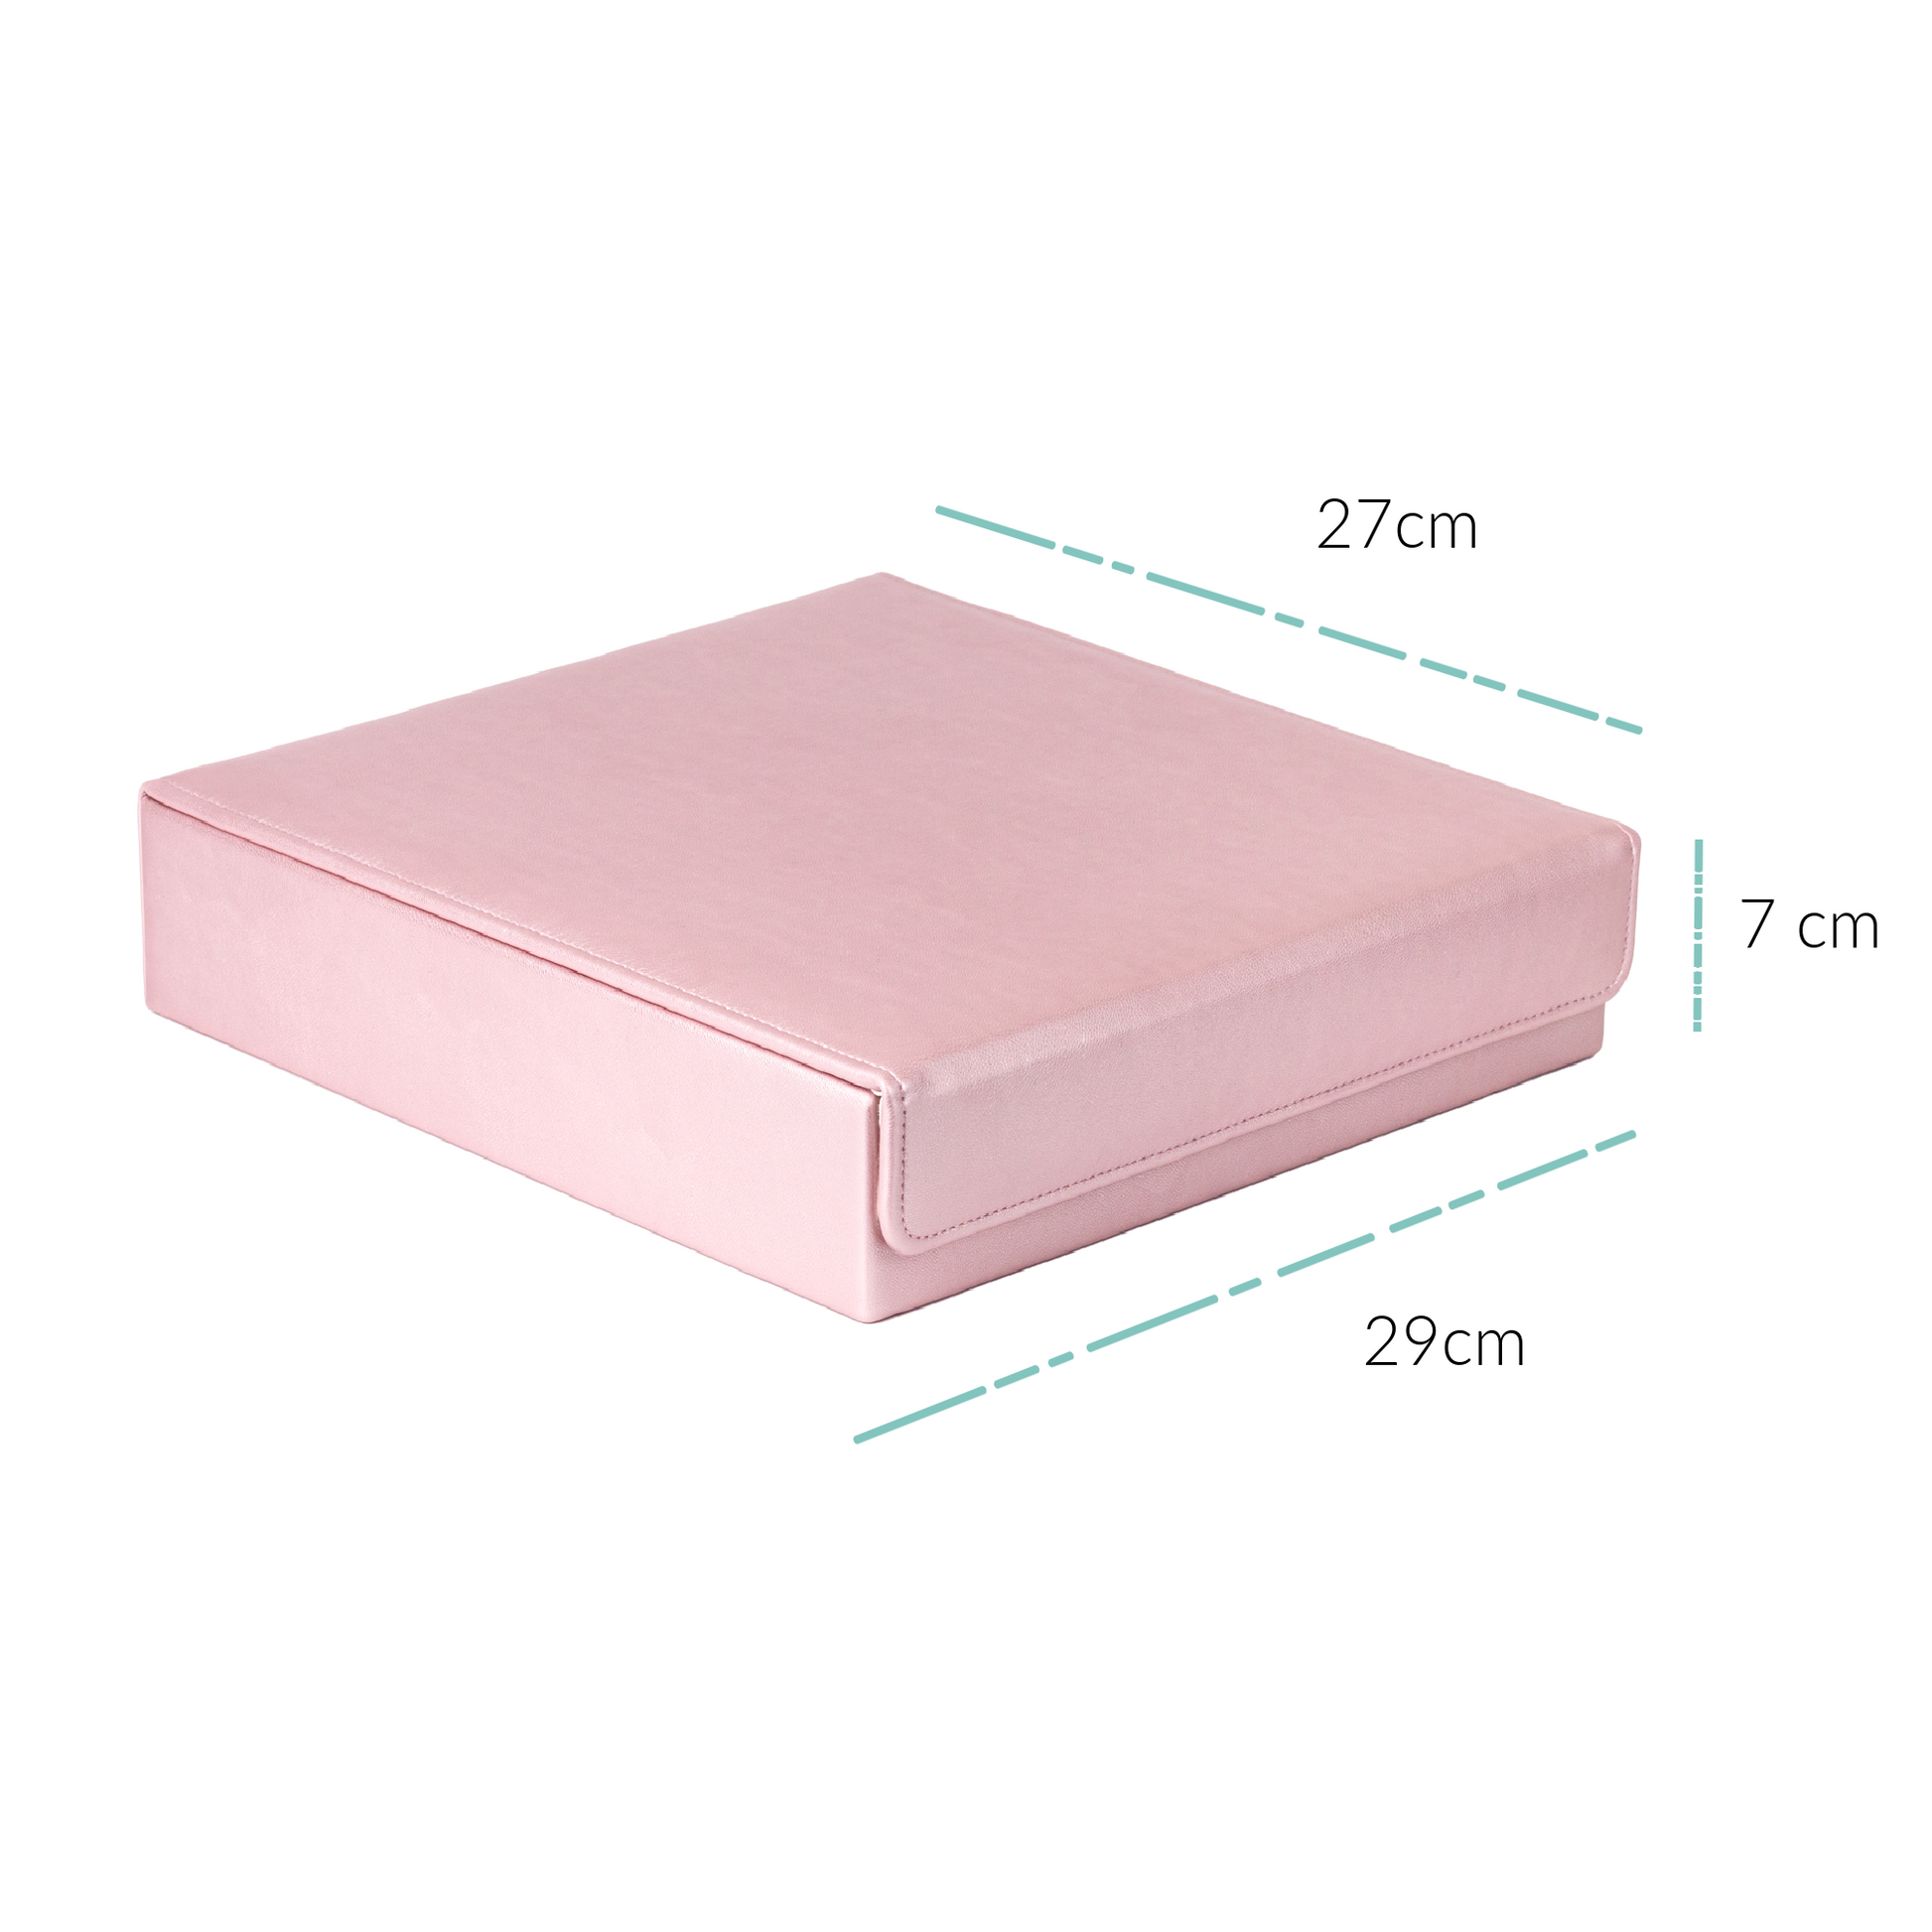 The pink hair accessory organiser is shown closed against a white background. The magnetic closing flap at the front is visible. The measurements are shown on the image. The box, when closed, measures 29cm wide, 27 cm depth, and 7cm high